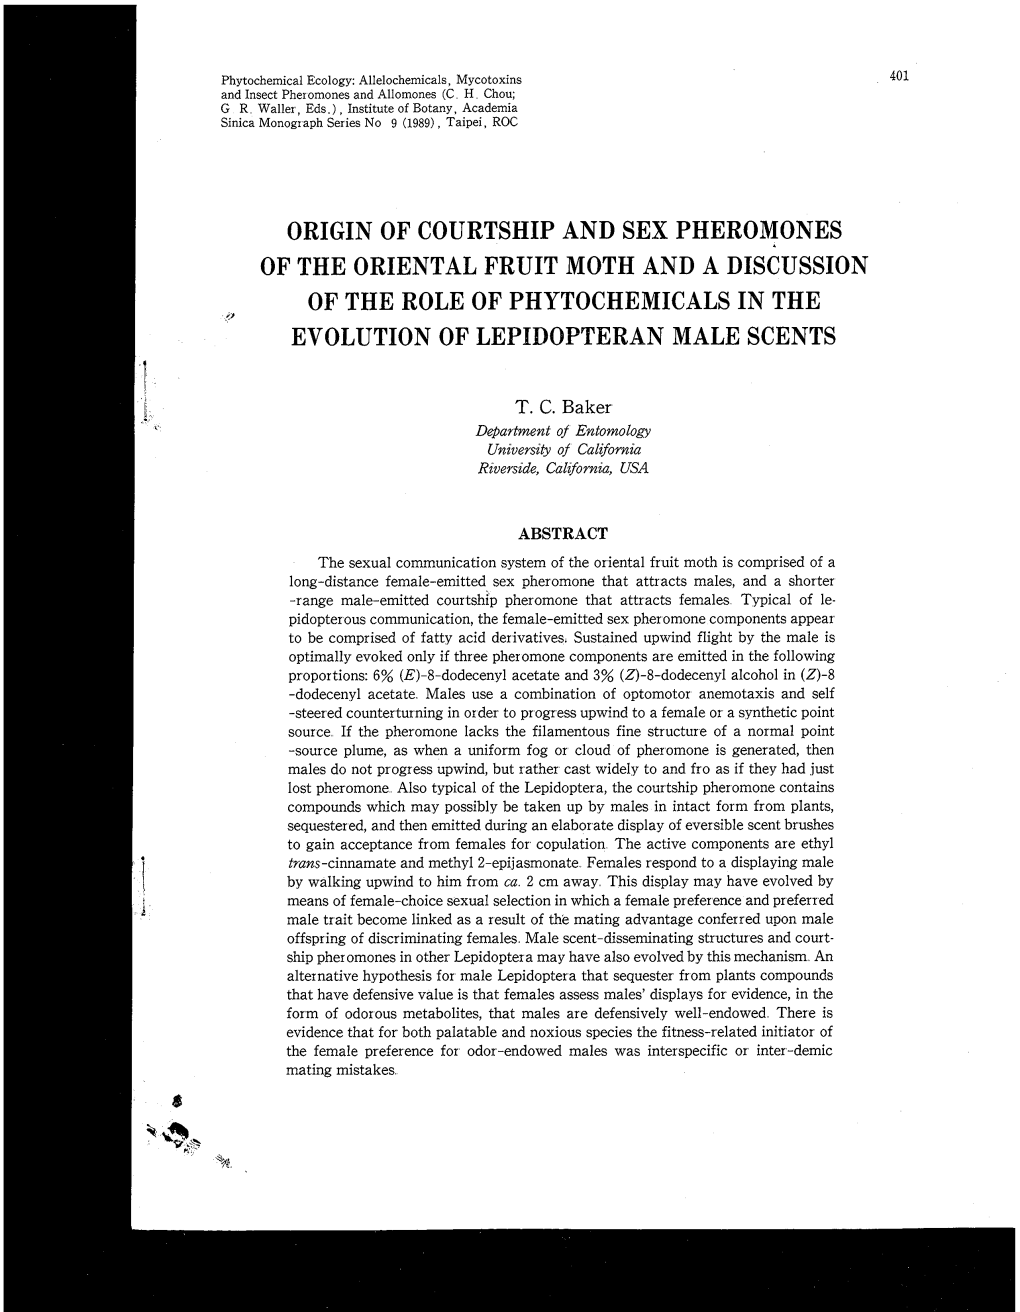 ORIGIN of COURTSHIP and SEX PHEROMONES of the ORIENTAL FRUIT MOTH and a DISCUSSION of the ROLE of PHYTOCHEMICALS in the Rj EVOLUTION of LEPIDOPTERAN MALE SCENTS